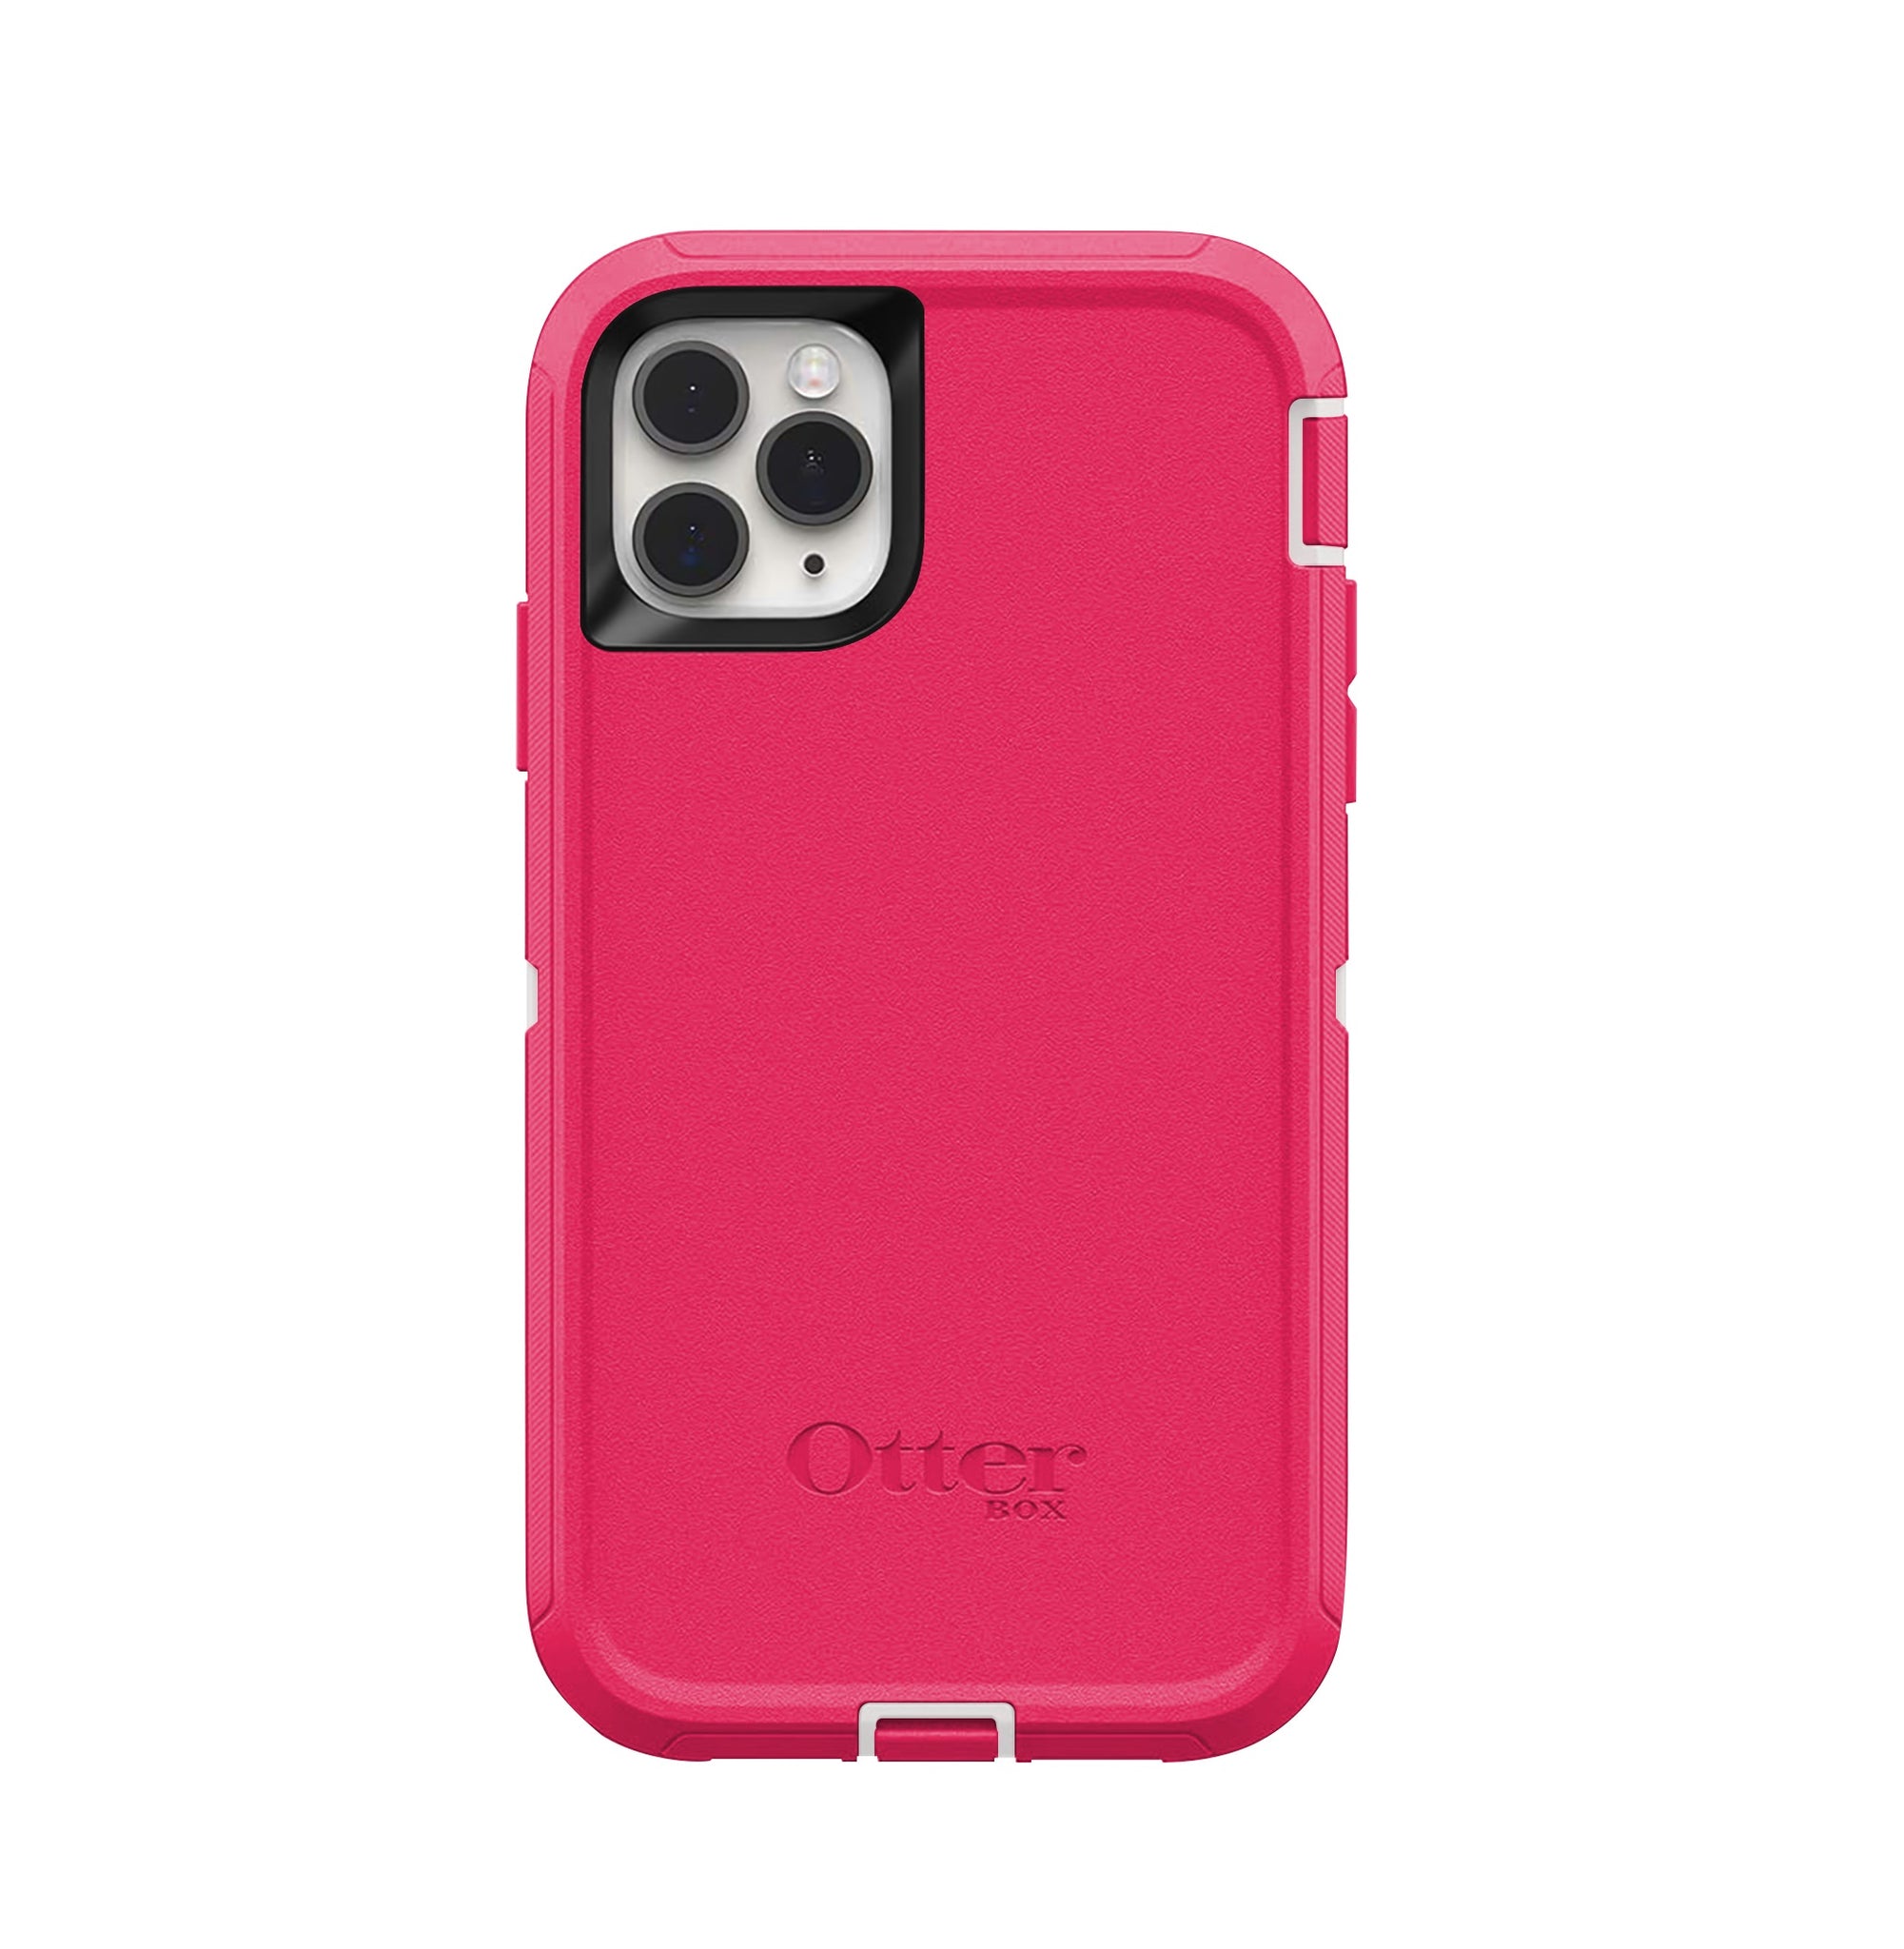 https://caserace.net/products/otterbox-defender-series-screenless-edition-case-for-iphone-11pro-5-8-ligth-pink-white